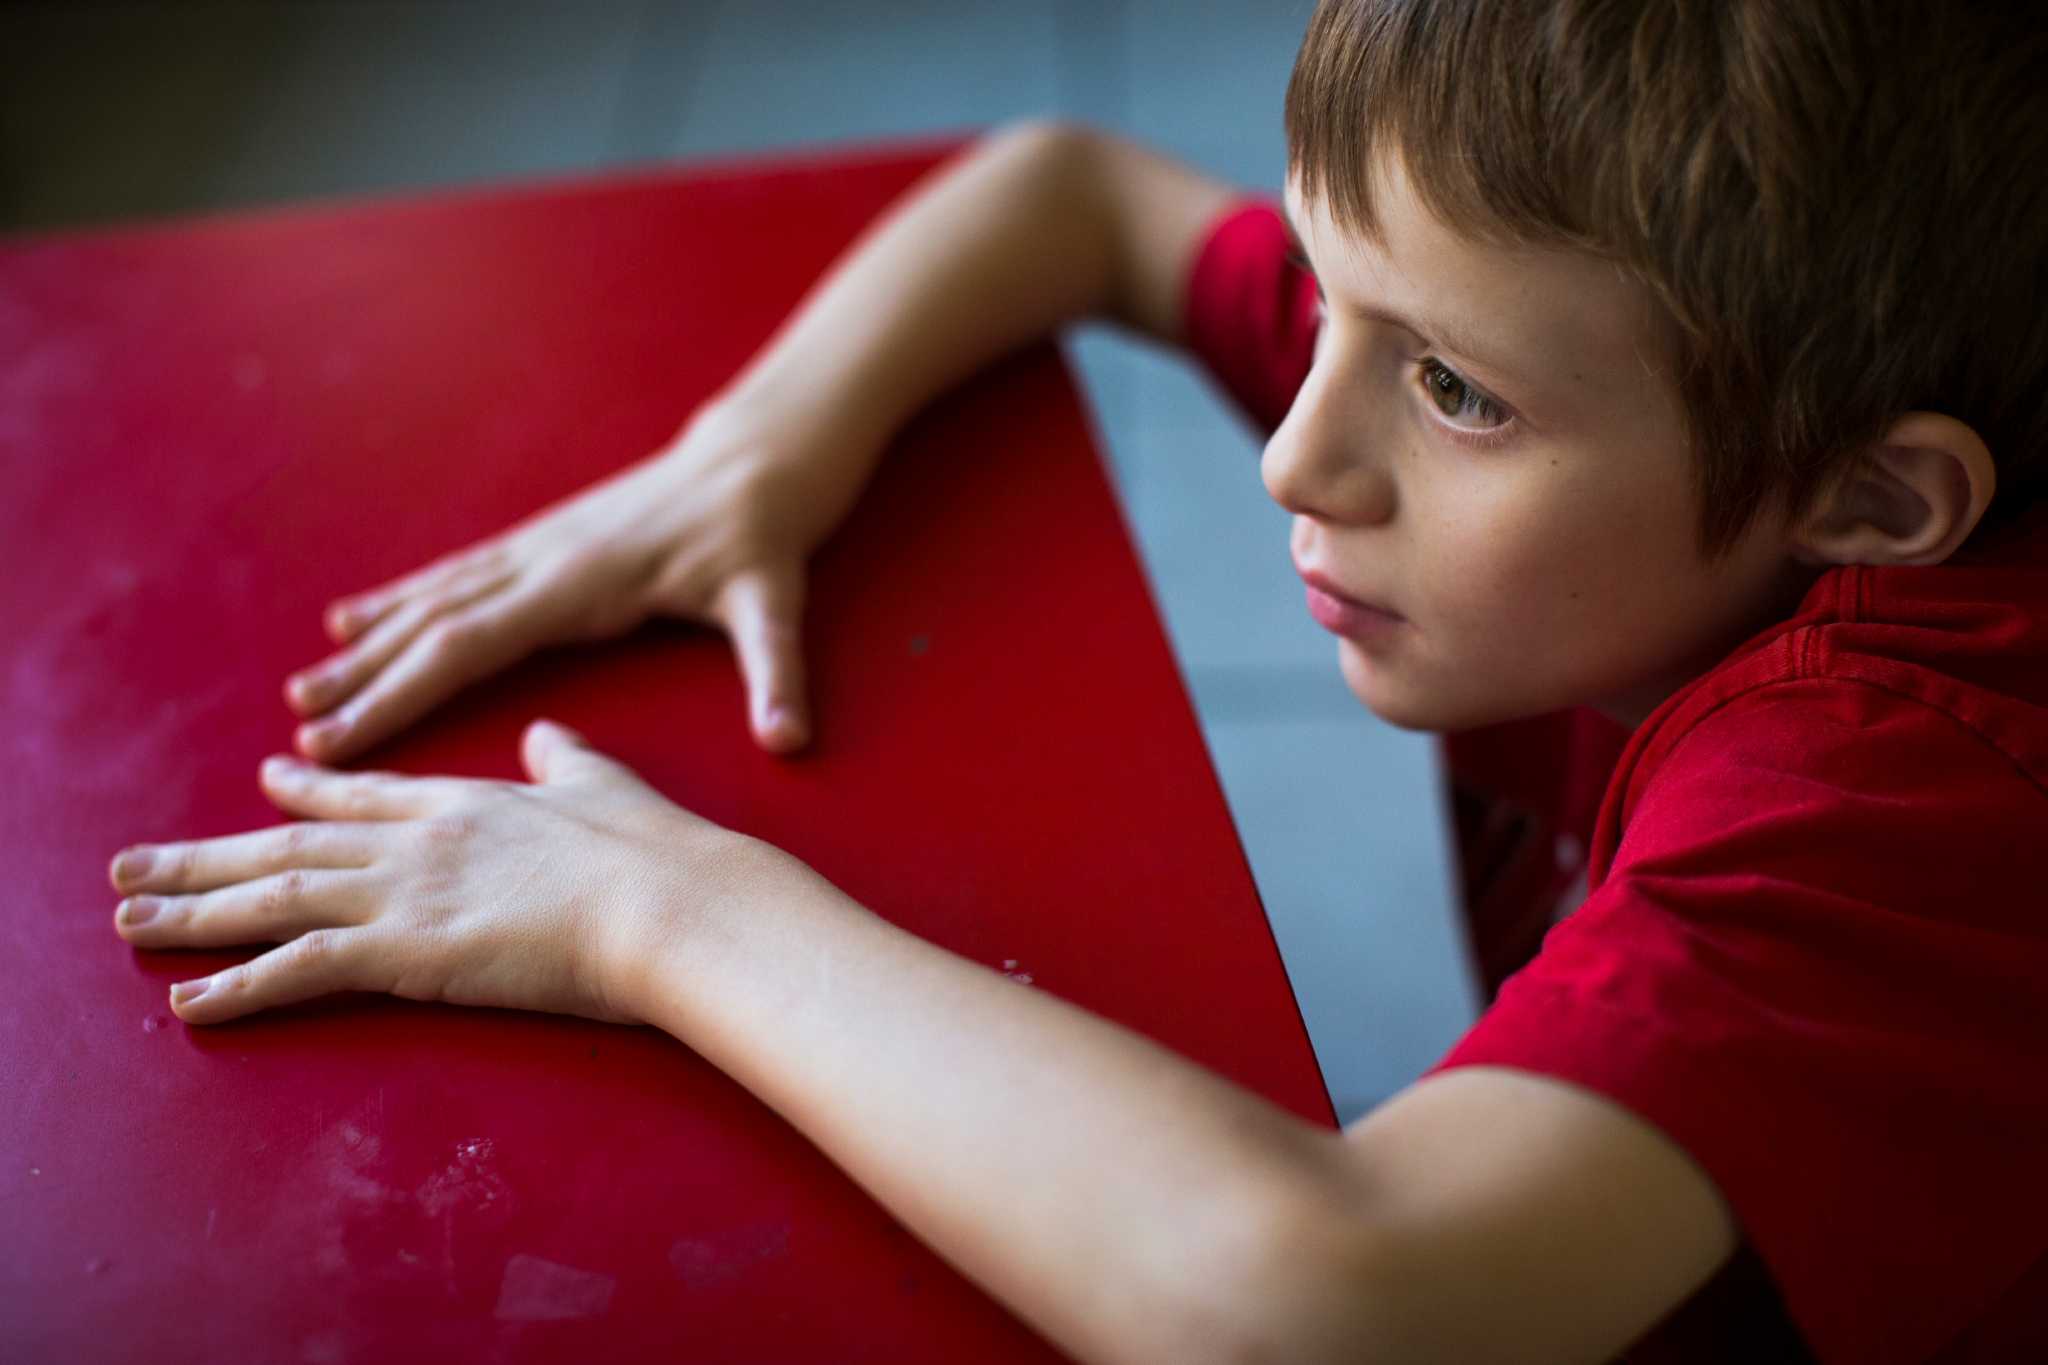 Should children with an autistic spectrum disorder be exempted from doing homework